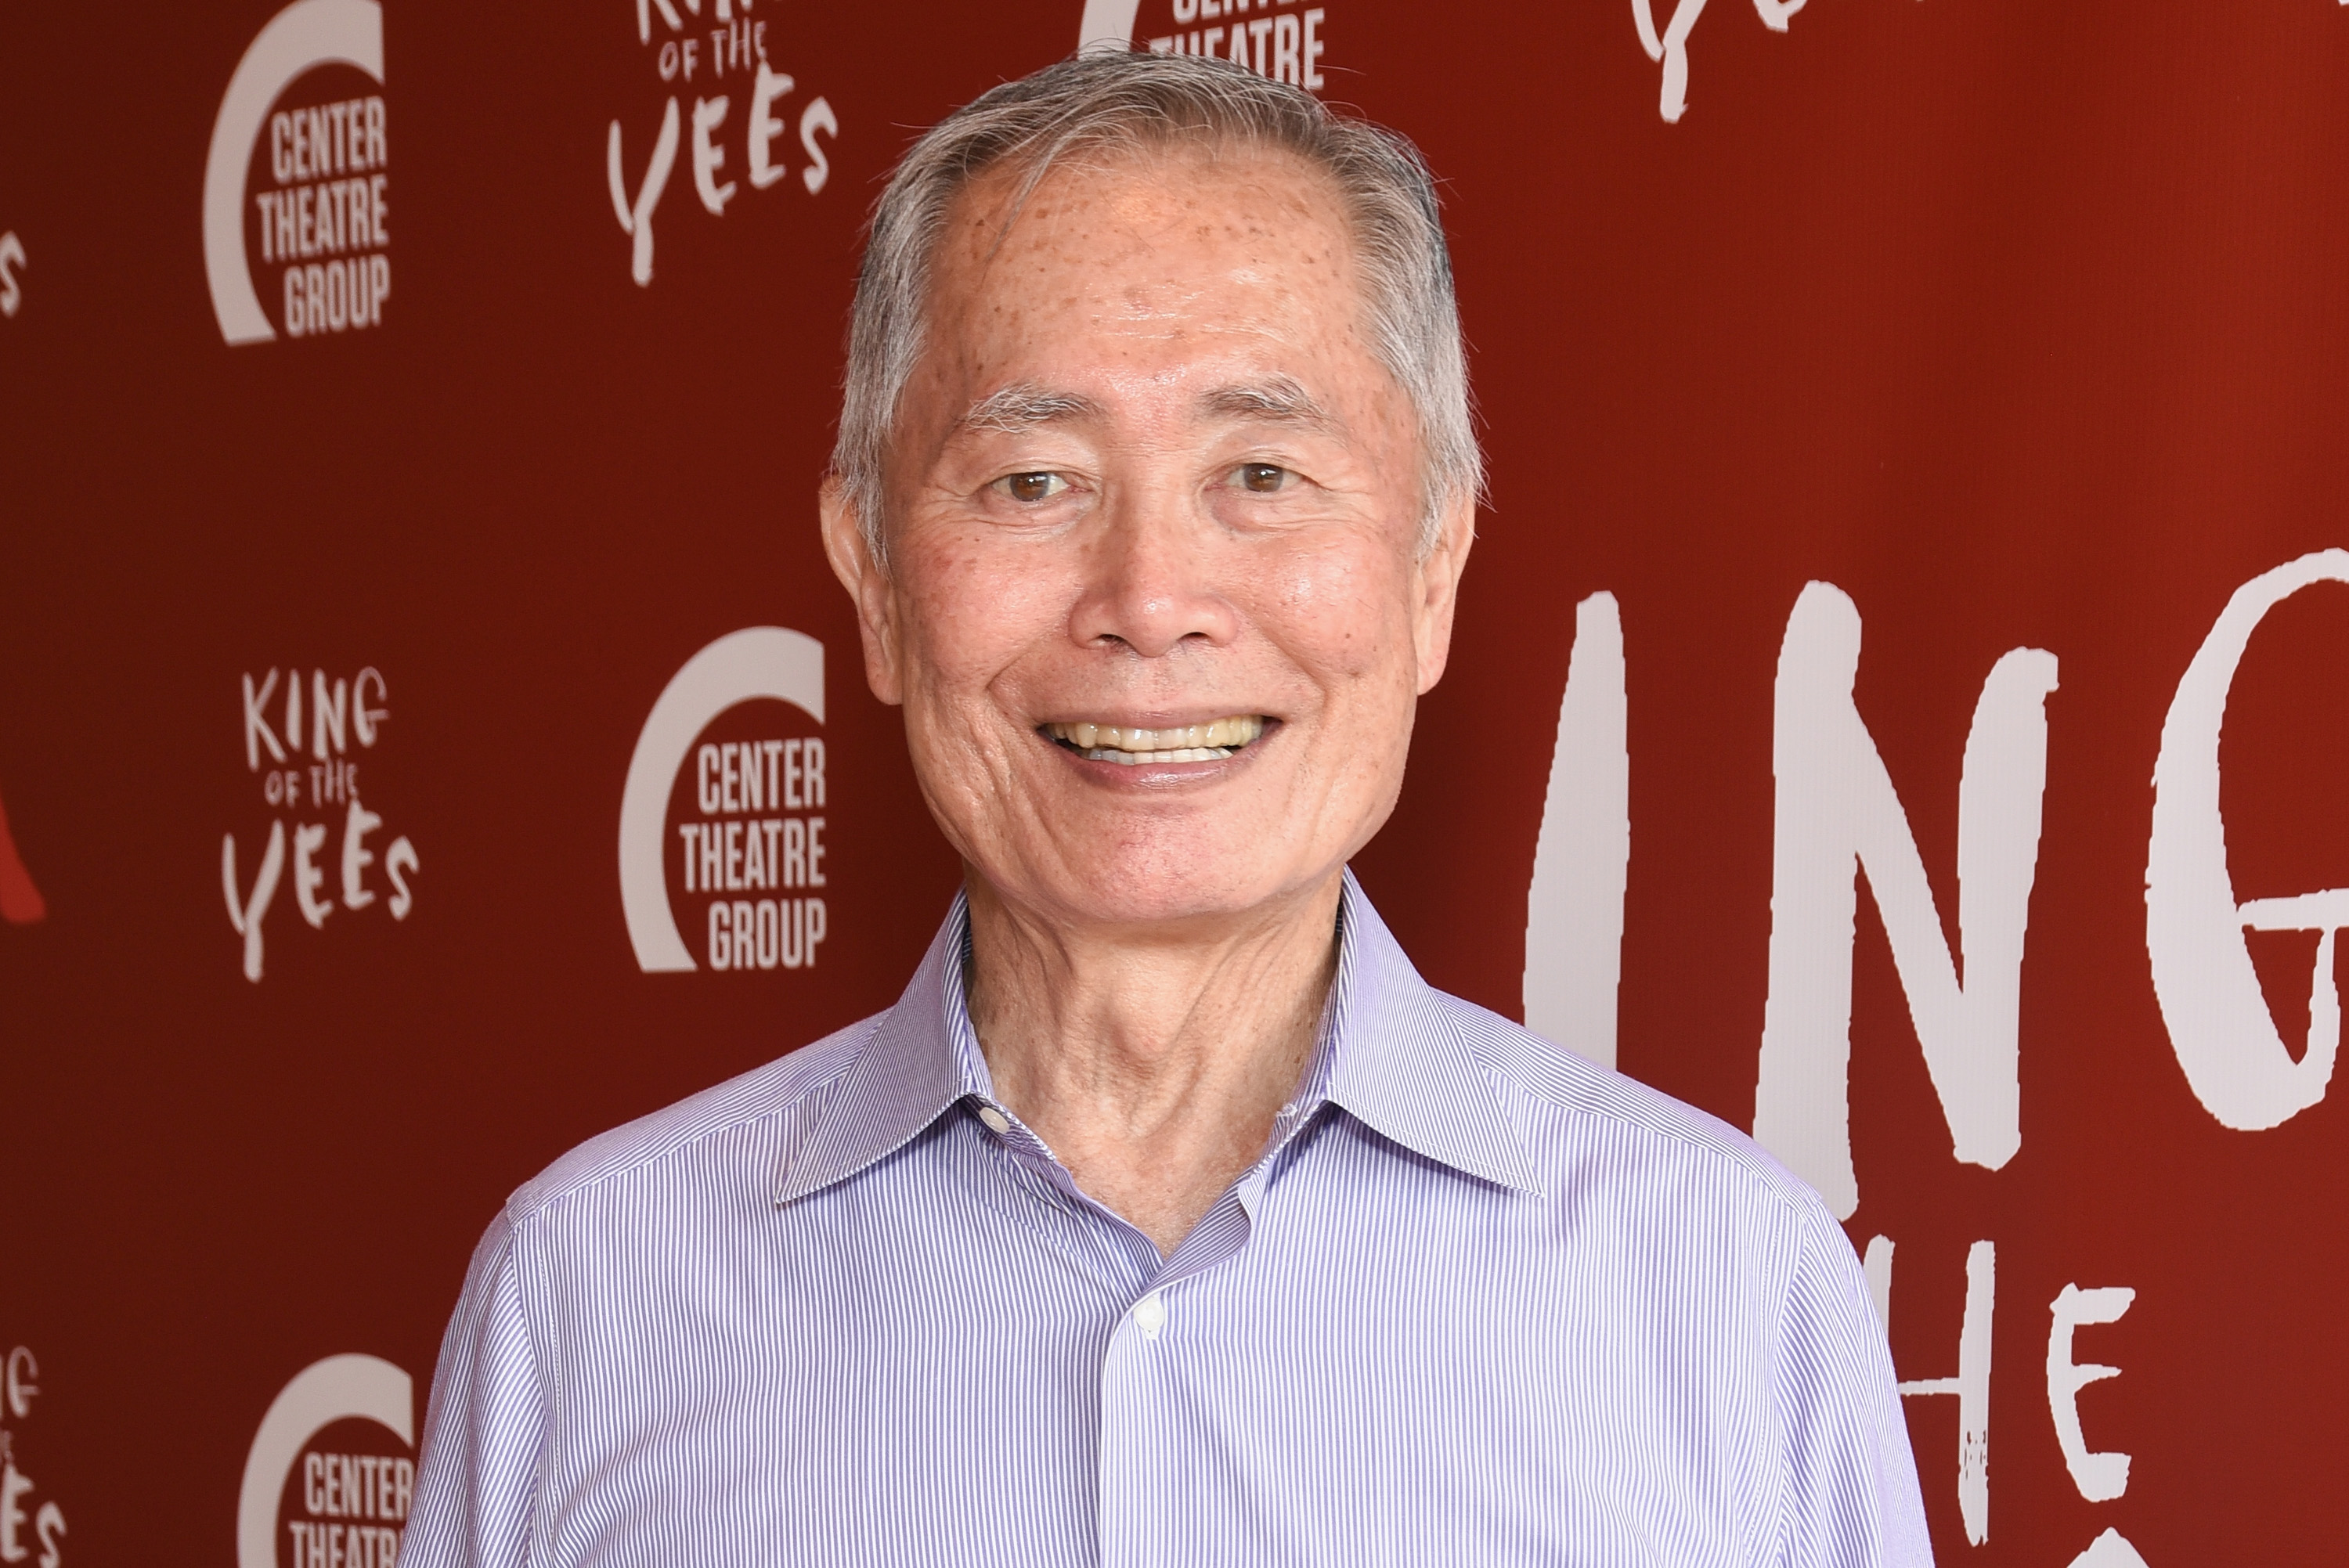 George Takei attends opening night of 'King Of The Yees' at Kirk Douglas Theatre in Culver City, Calif., on July 16, 2017. (Tara Ziemba—FilmMagic/Getty Images)